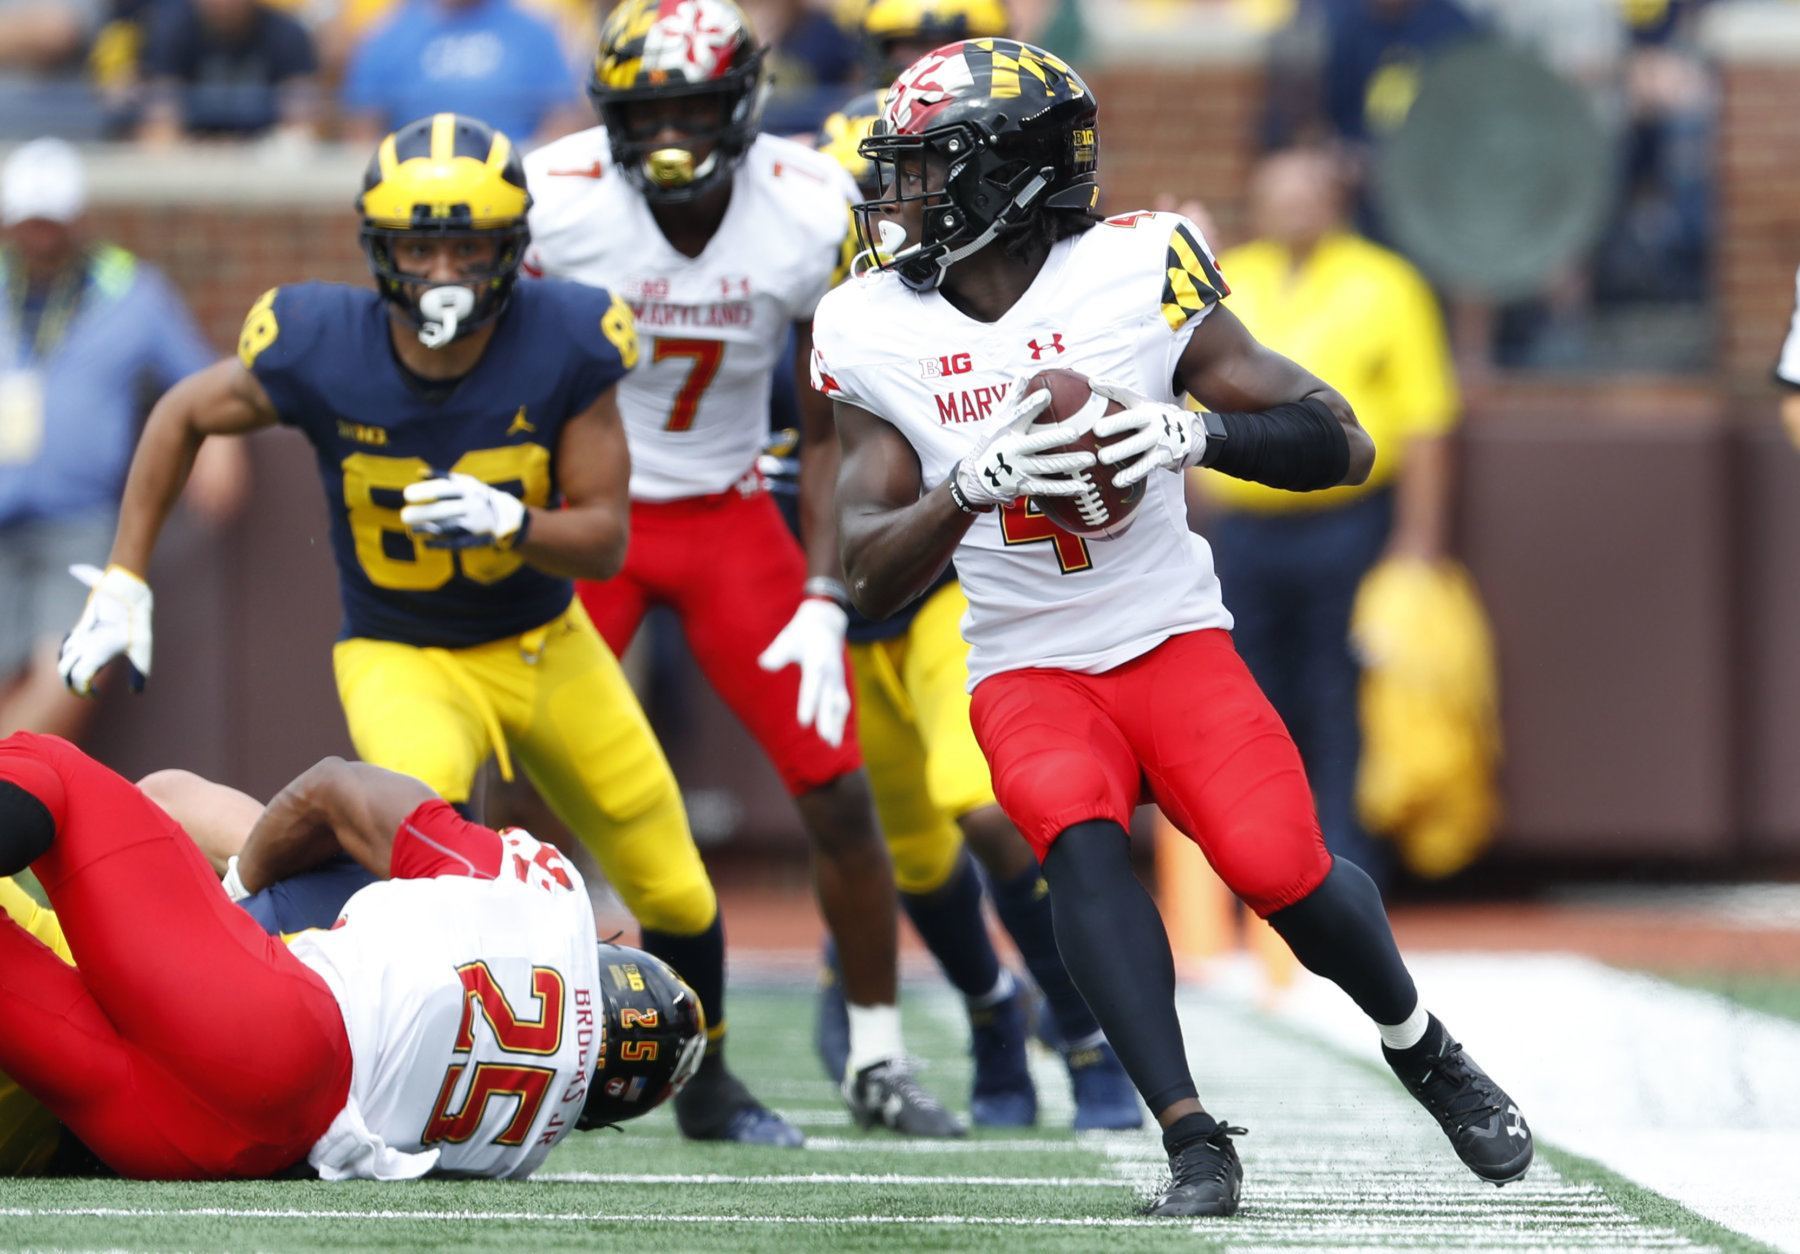 Maryland defensive back Darnell Savage Jr. (4) intercepts a Michigan pass in the first half of an NCAA football game in Ann Arbor, Mich., Saturday, Oct. 6, 2018. (AP Photo/Paul Sancya)